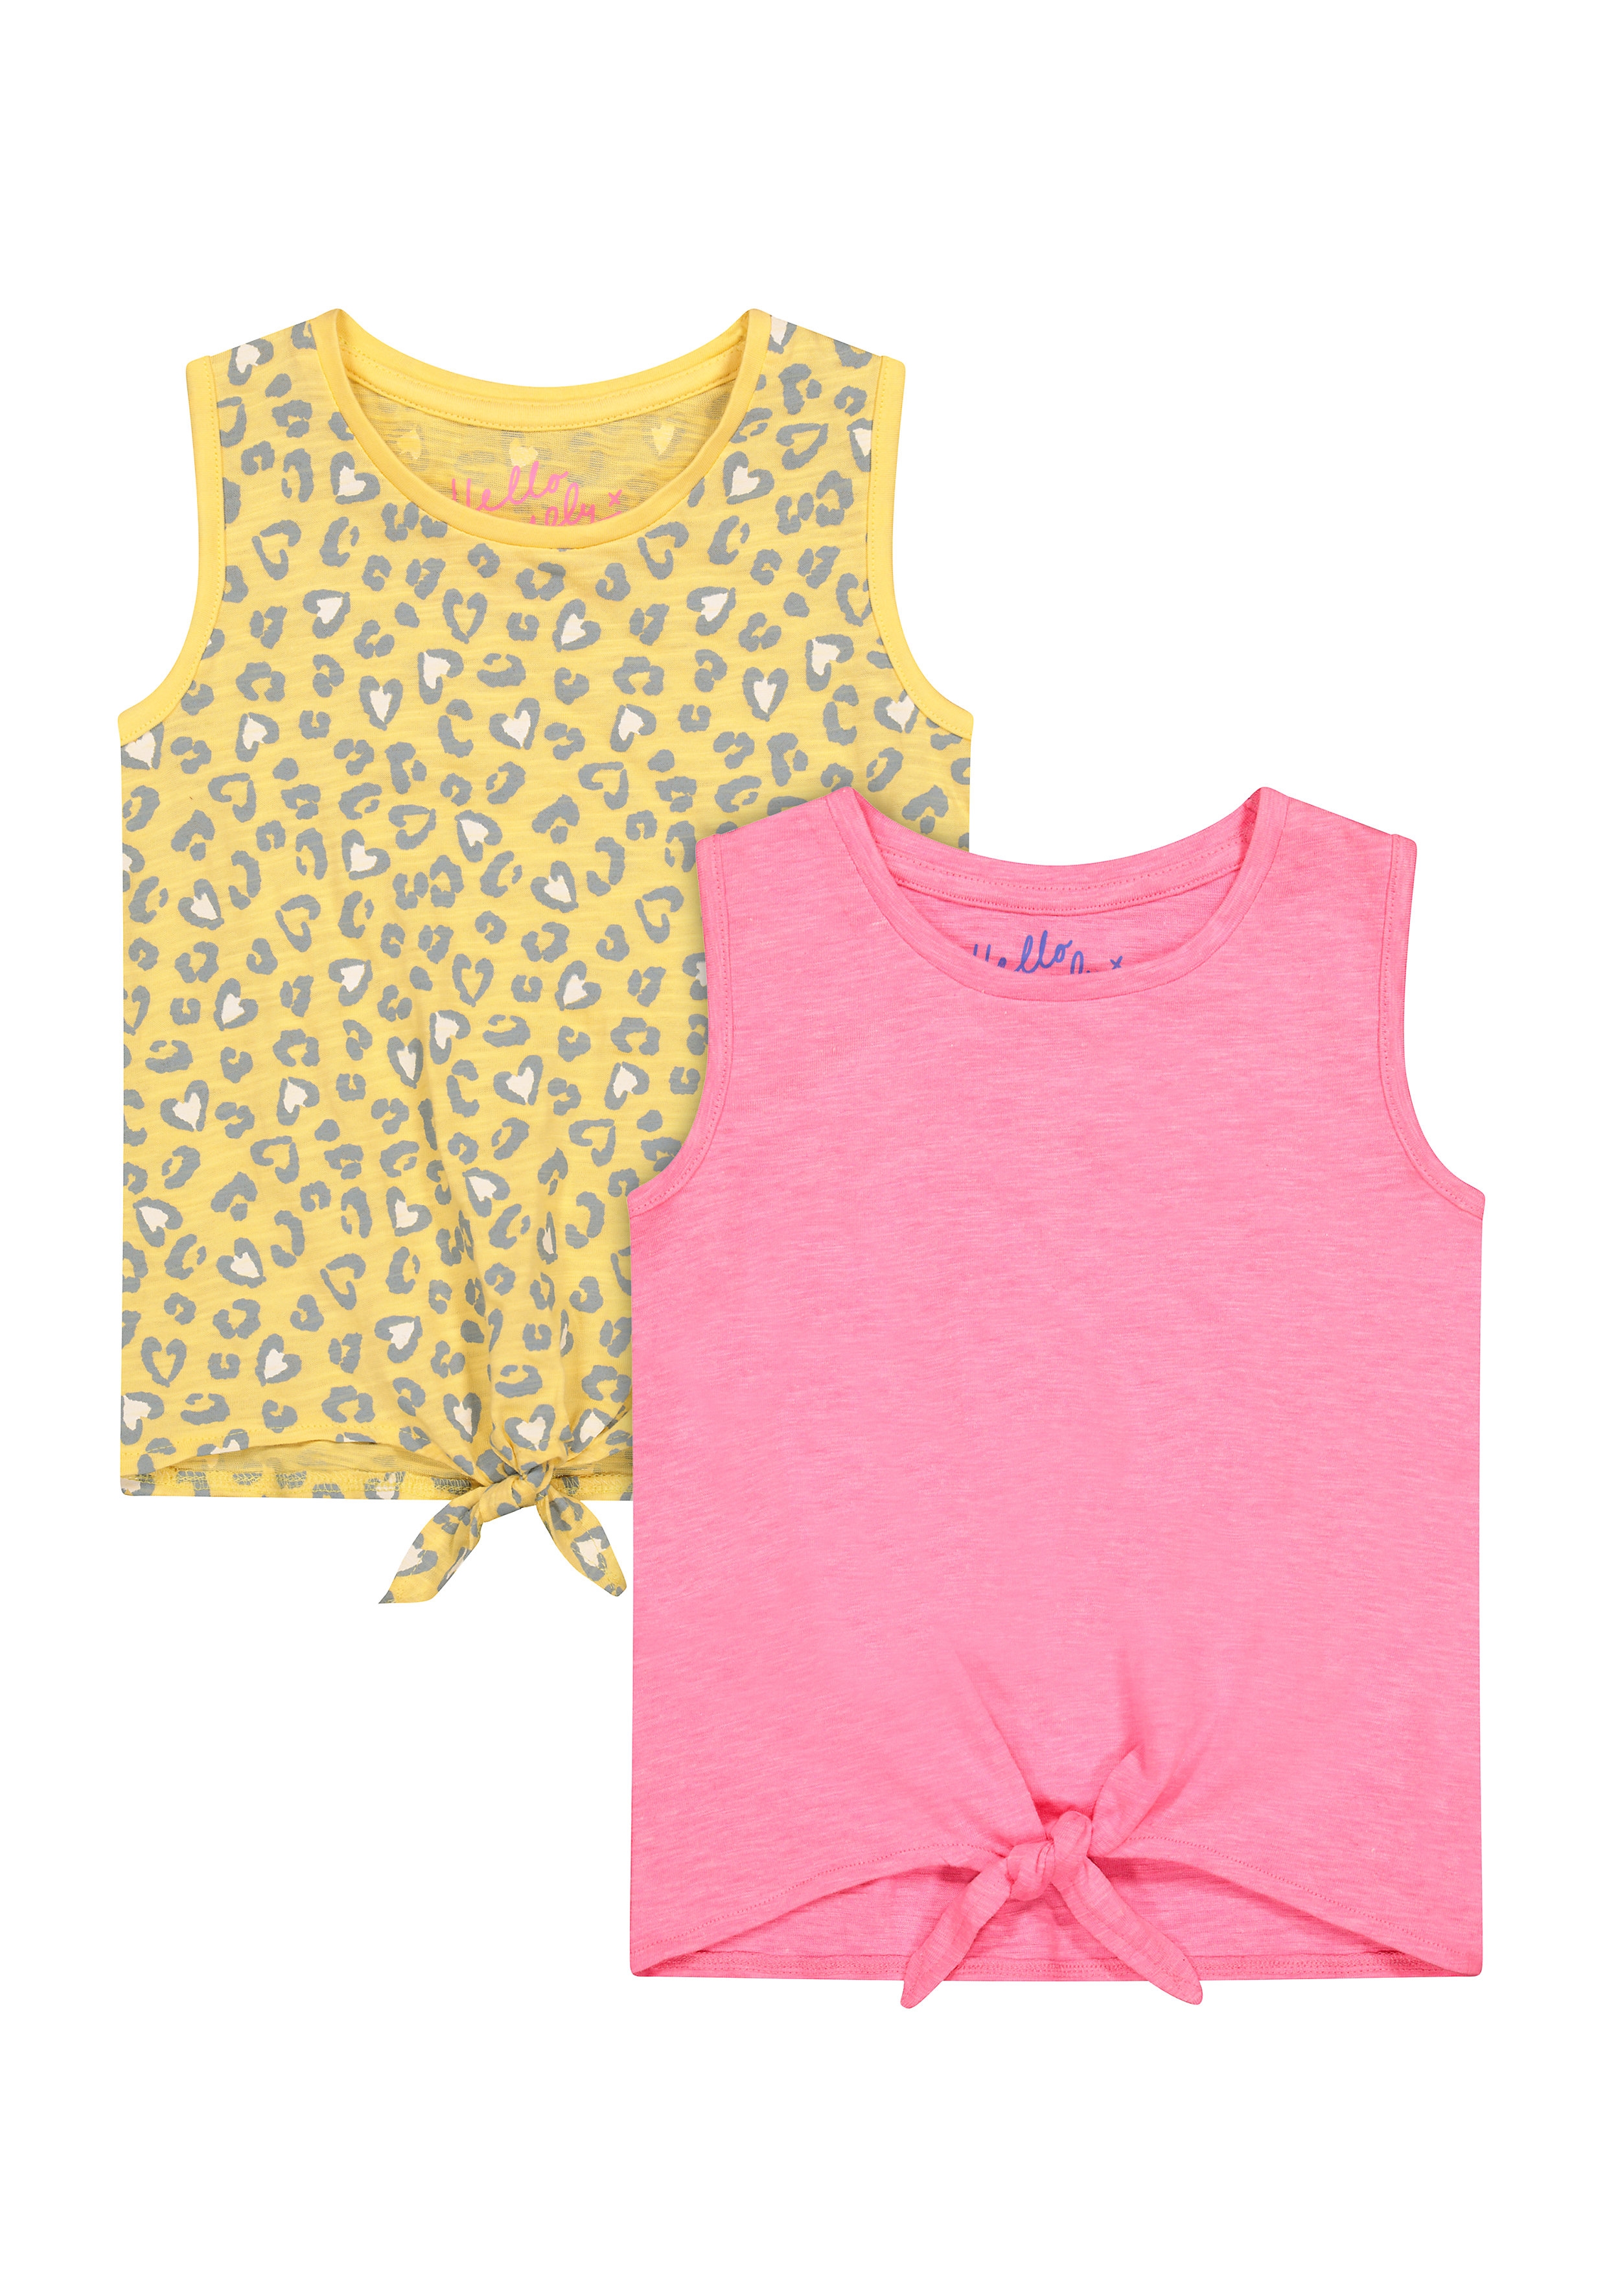 Mothercare | Girls Sleeveless Round Neck T-shirts  - Pack Of 2 - Multicolor